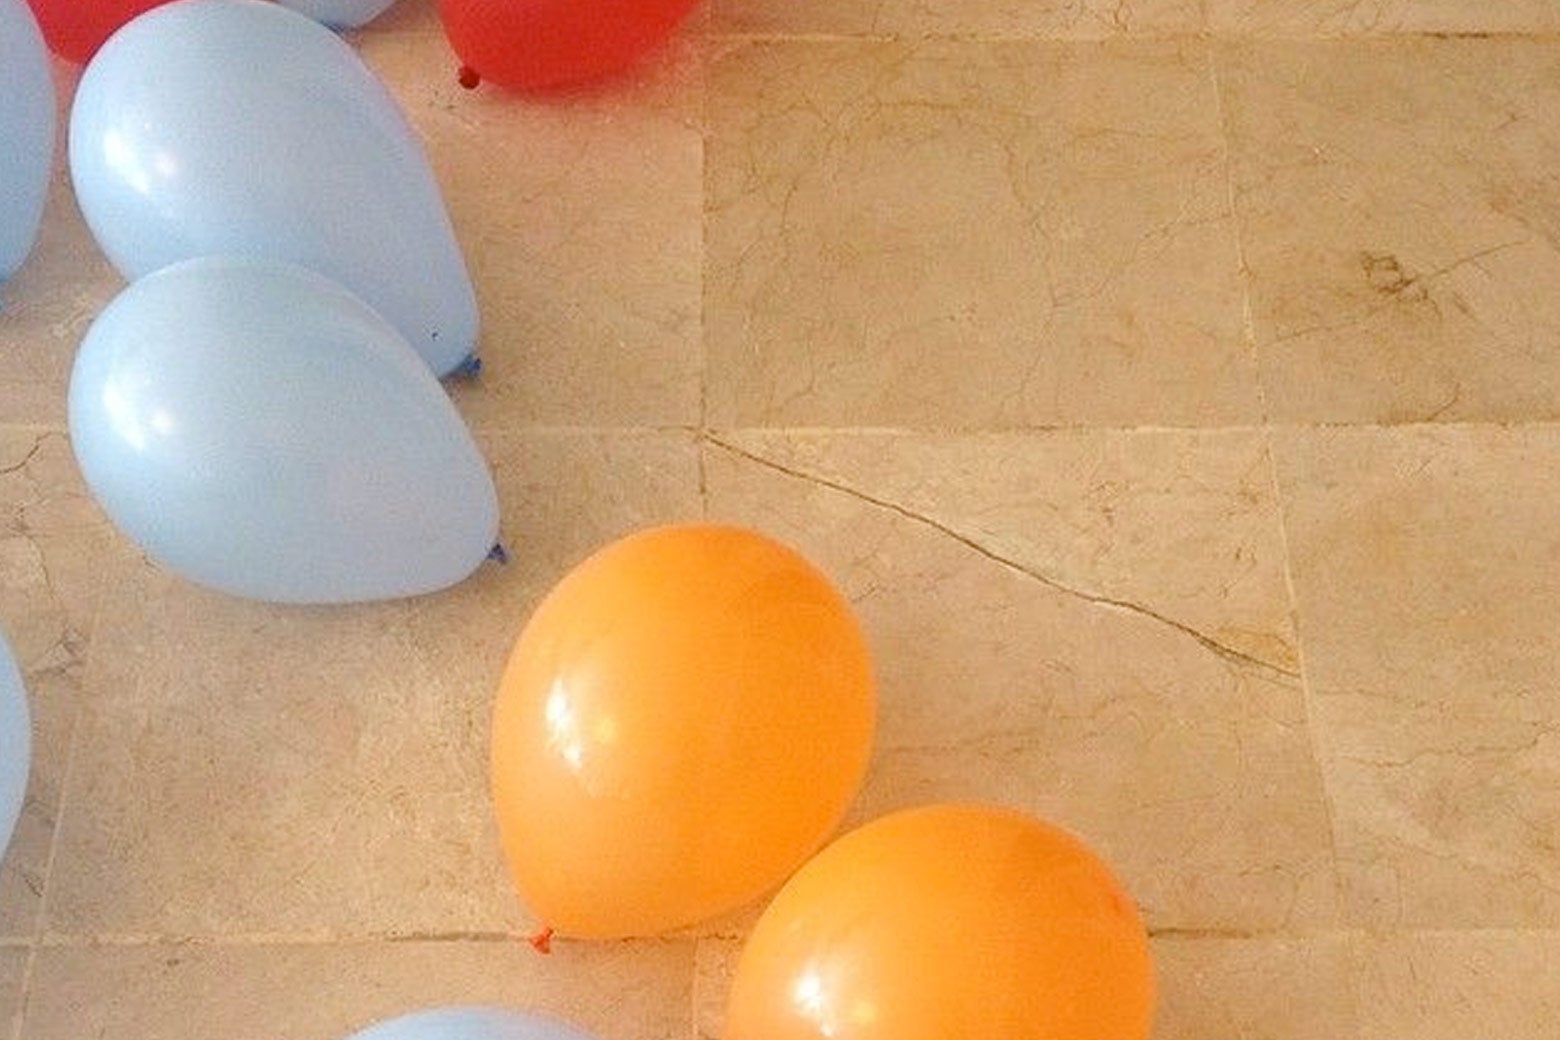 Balloons on the floor at the house.